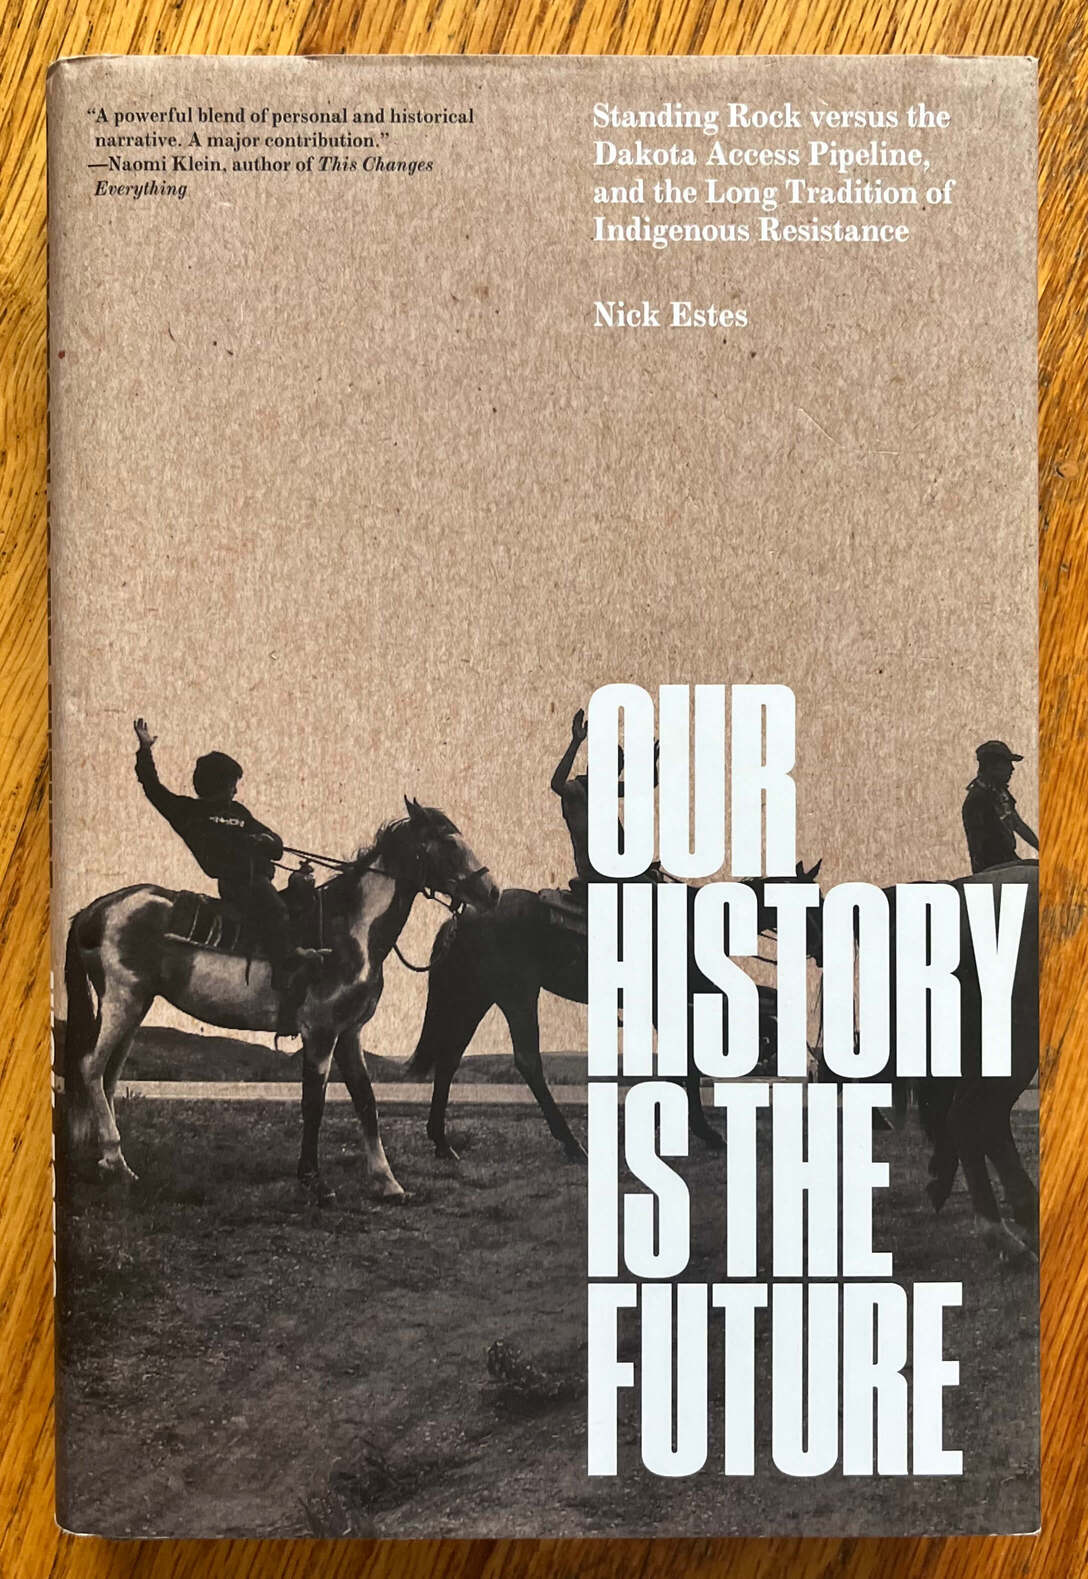 “Our History is the Future: Standing Rock versus the Dakota Access Pipeline, and the Long Tradition of Indigenous Resistance” by Nick Estes.